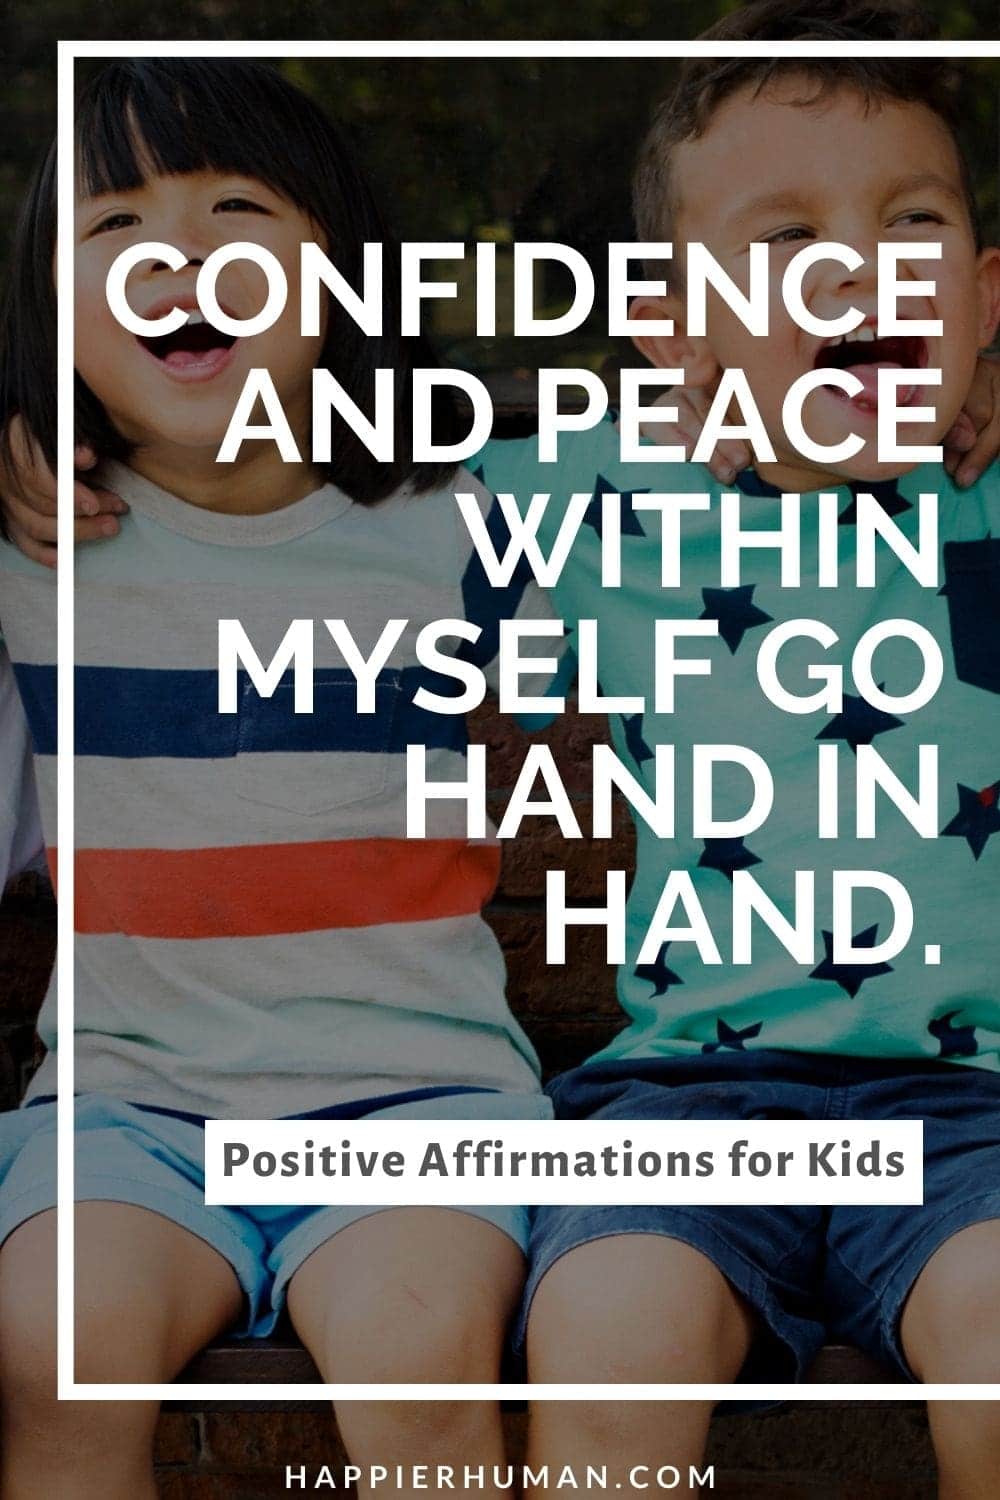 Positive Affirmations for Kids - Confidence and peace within myself go hand in hand. | affirmations for 3-year-old | positive affirmations to tell your child | positive affirmations for children